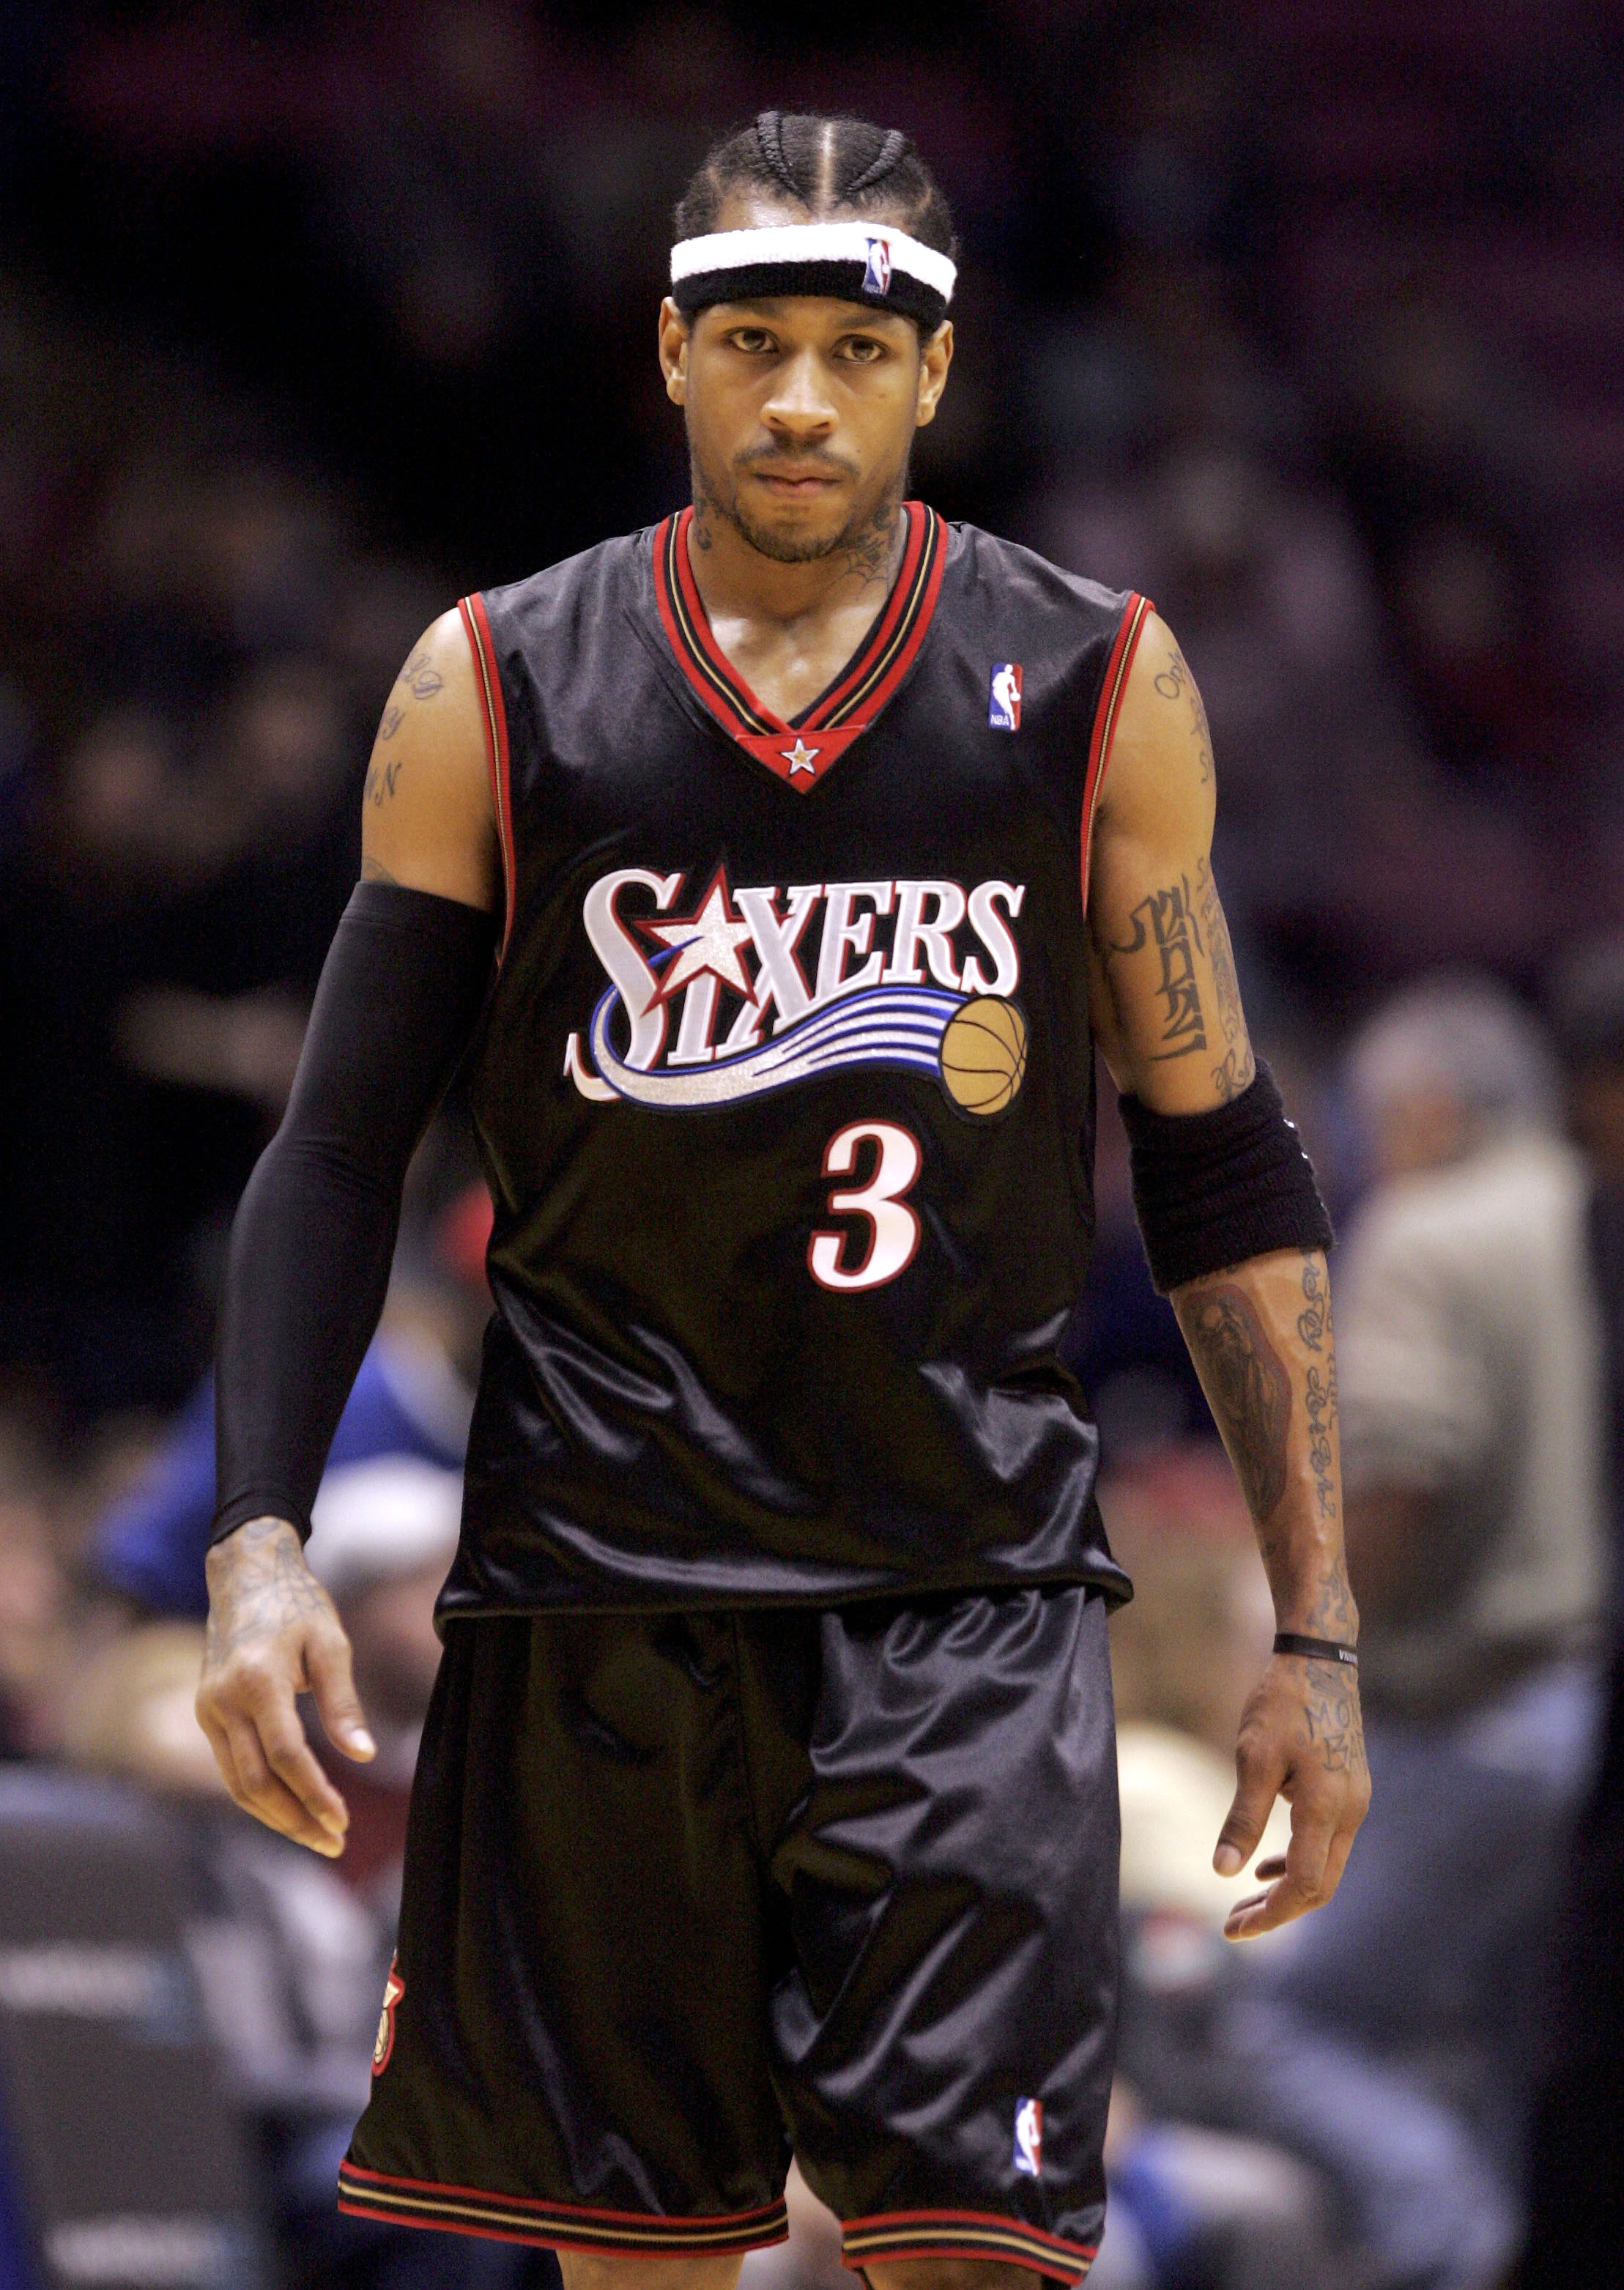 EAST RUTHERFORD, NJ - DECEMBER 10:  Allen Iverson #3 of the Philadelphia 76ers looks on against the New Jersey Nets during their game at Continental Airlines Arena on December 10, 2005 in East Rutherford, New Jersey.The Sixers defeated the Nets 107-95. NO